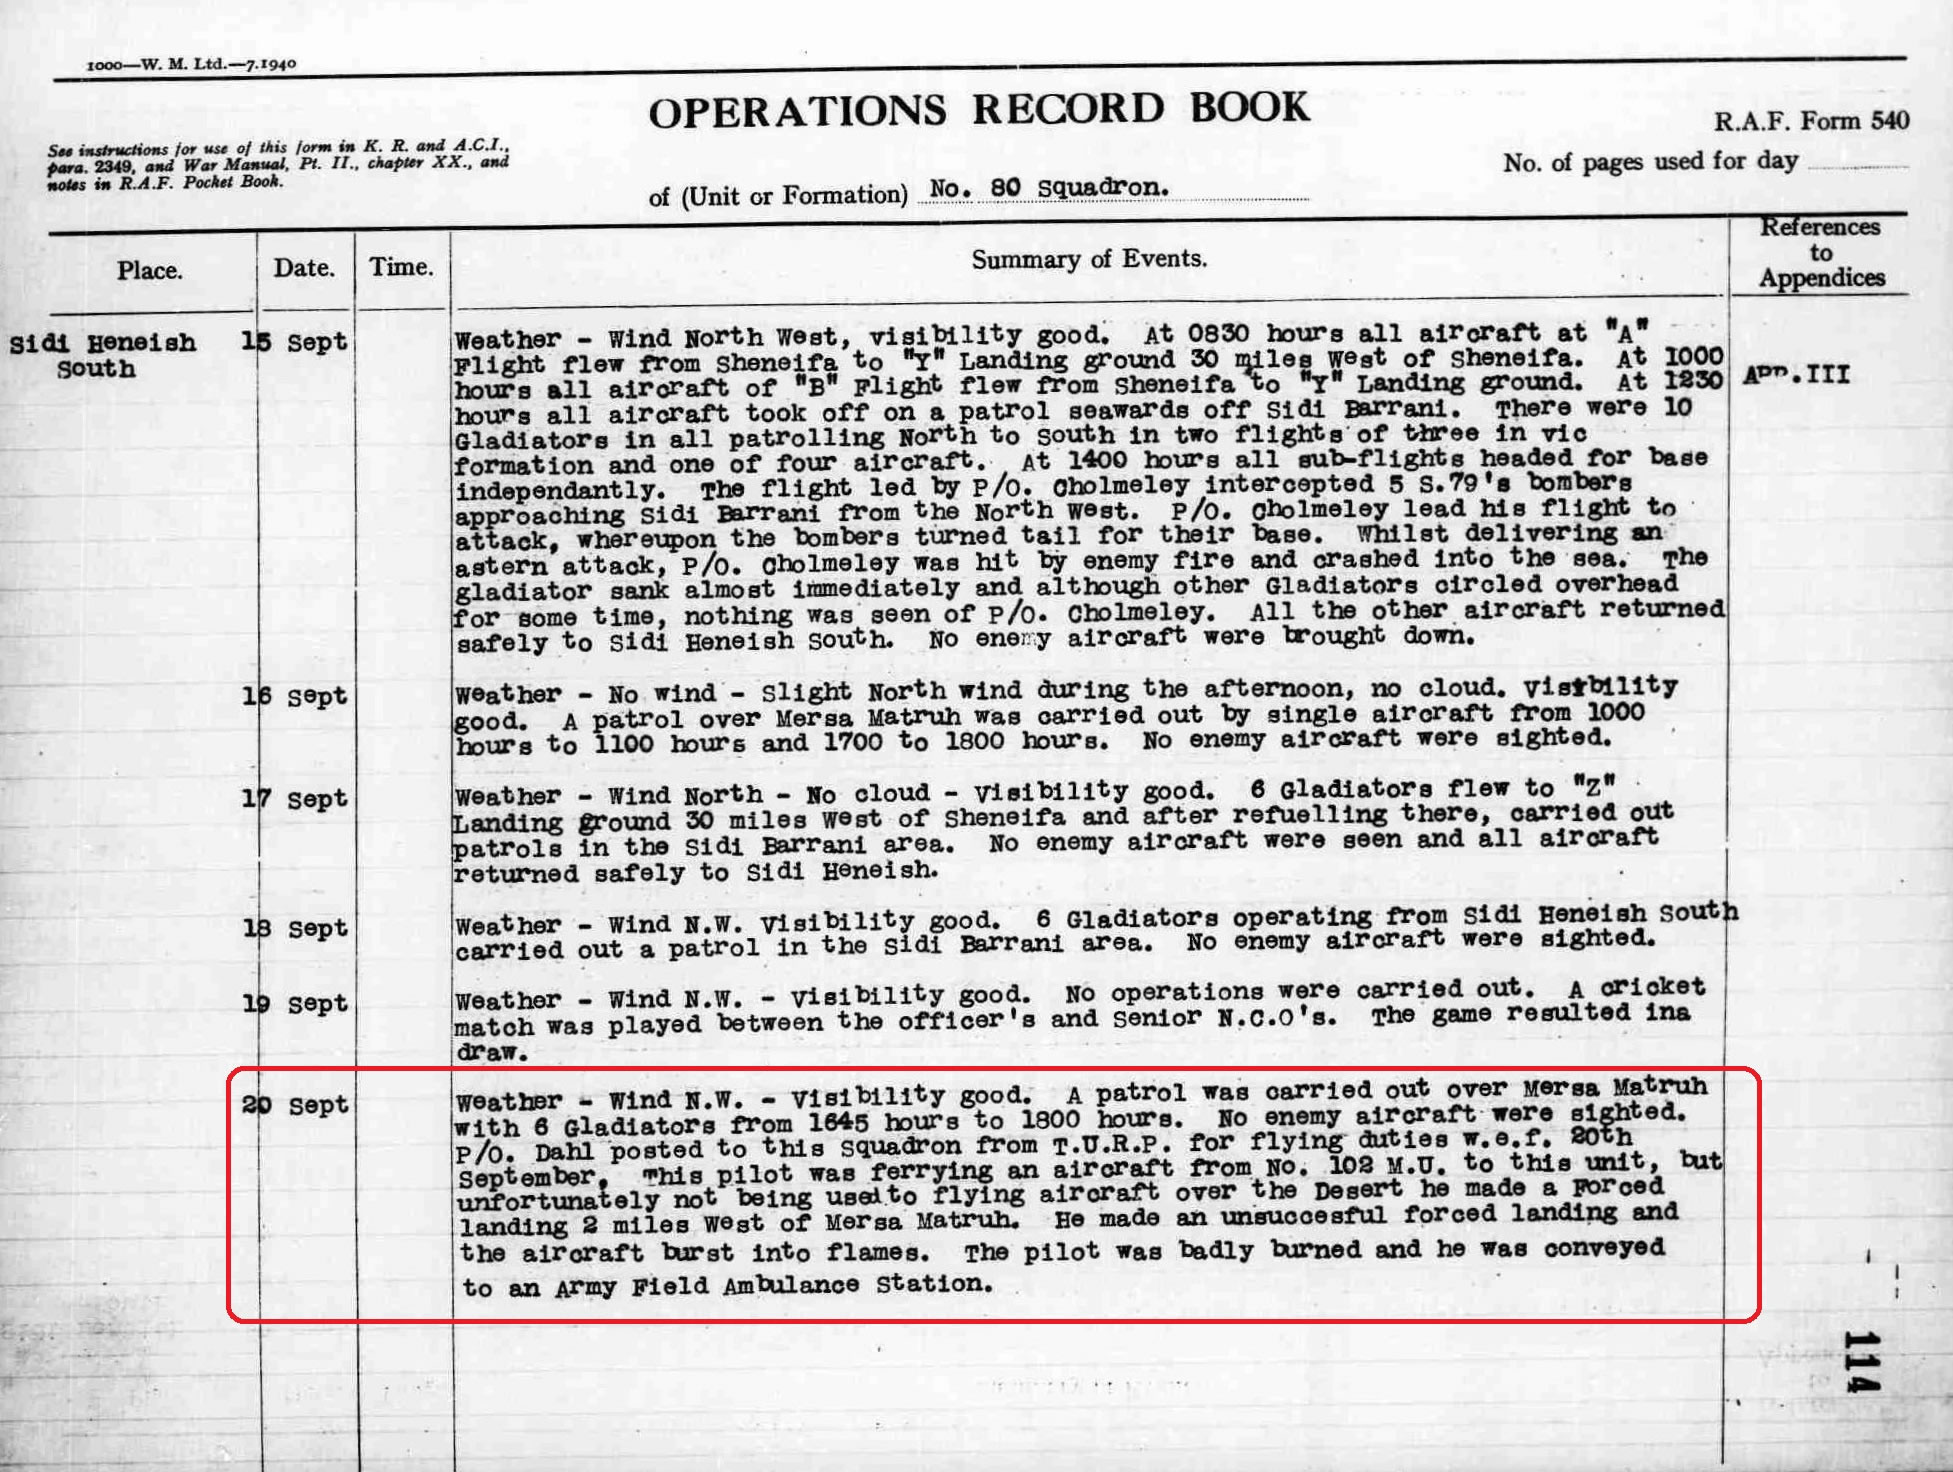 Operations Record Book detailing Dahl's crash in the desert